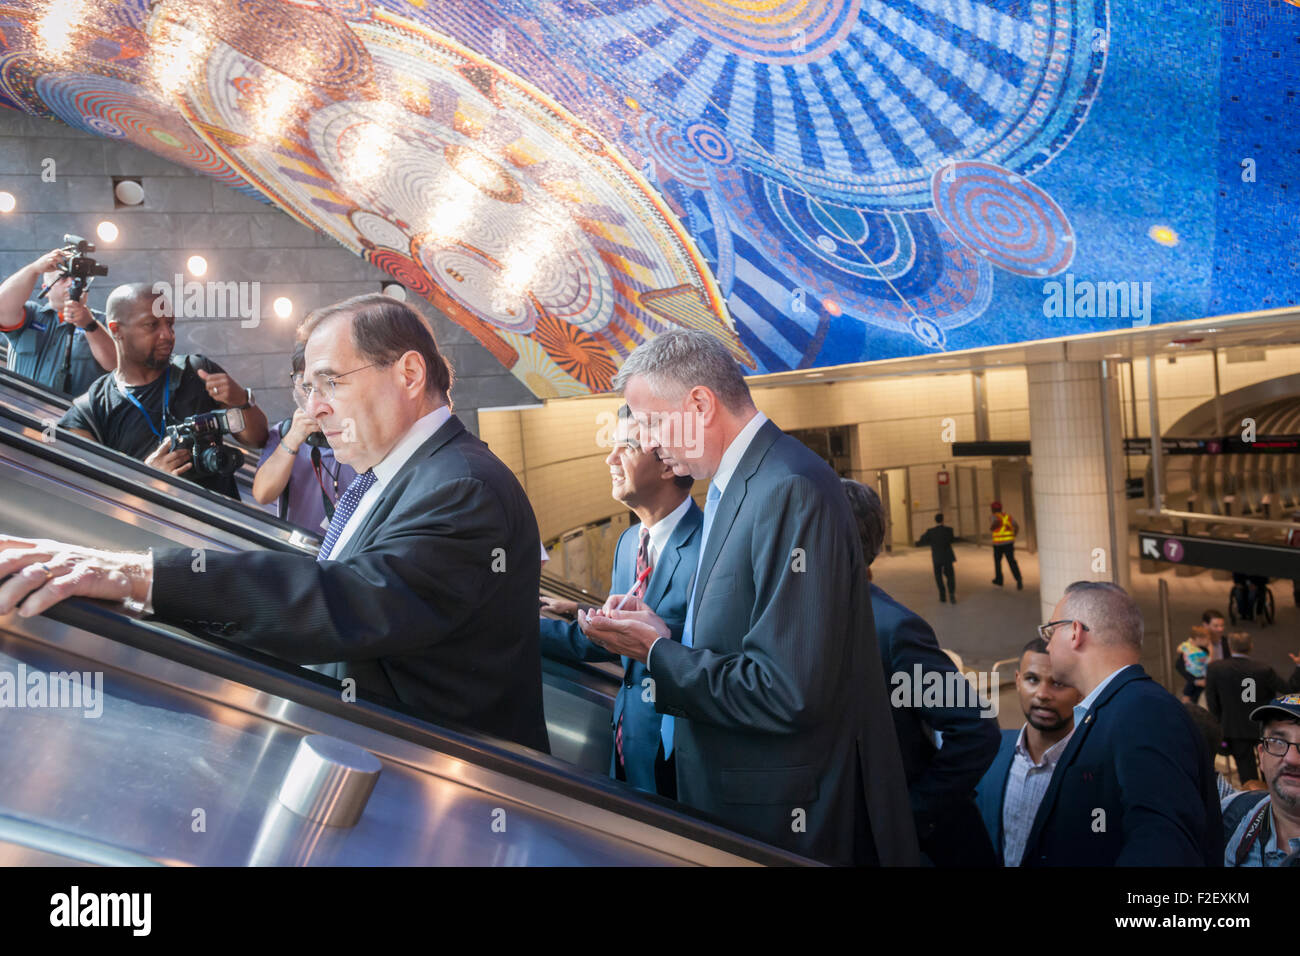 (L-R) Cong. Jerry Nadler, NYC Councilmember Ydanis Rodrguez, and New York Mayor Bill de Blasio with other officials ride the escalator at the new 34th Street-Hudson Yards terminal station on the 7 Subway line extension on its grand opening, Sunday, September 13, 2015. (© Richard B. Levine) Stock Photo